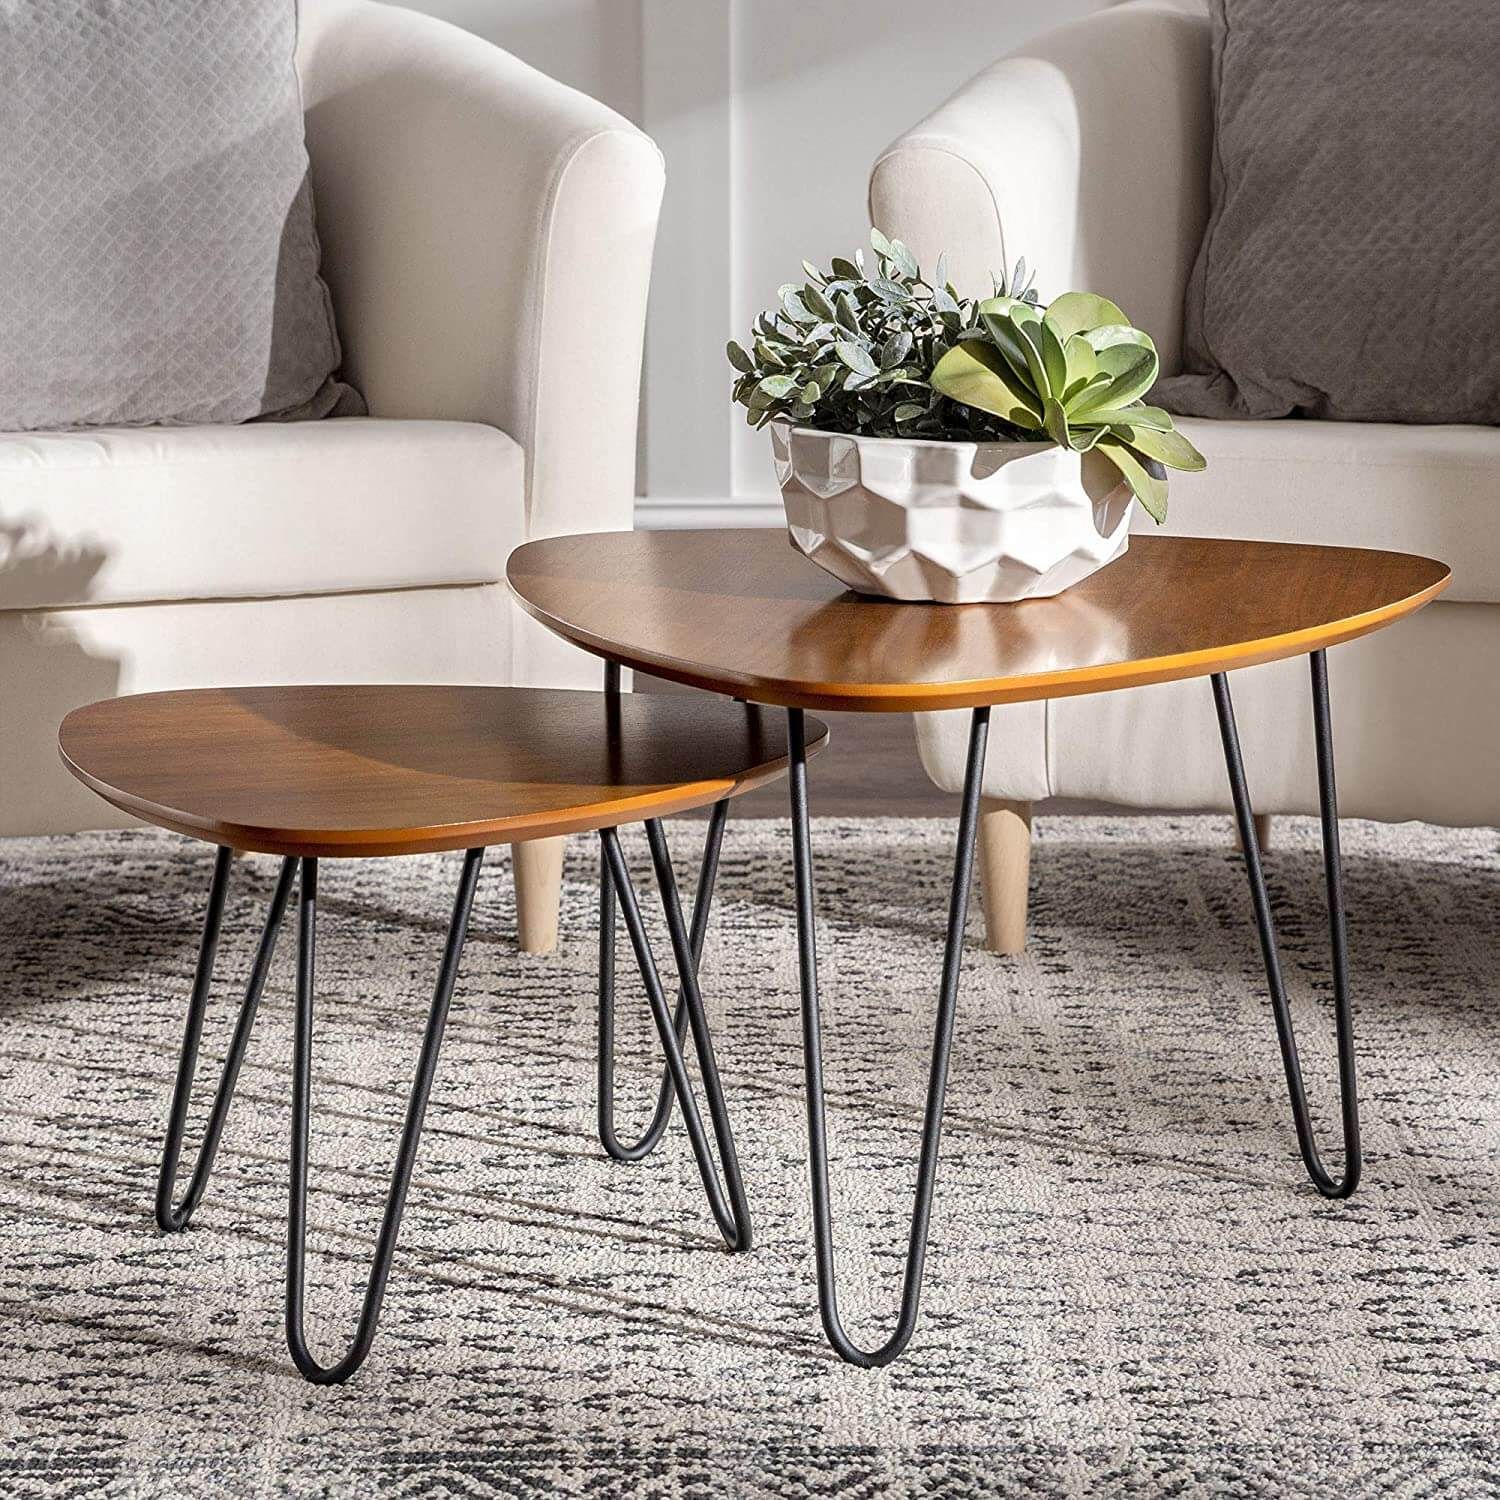 Choosing The Perfect Mid Century Modern Coffee Table – Oceanone Interiors Intended For Mid Century Modern Coffee Tables (Photo 14 of 15)